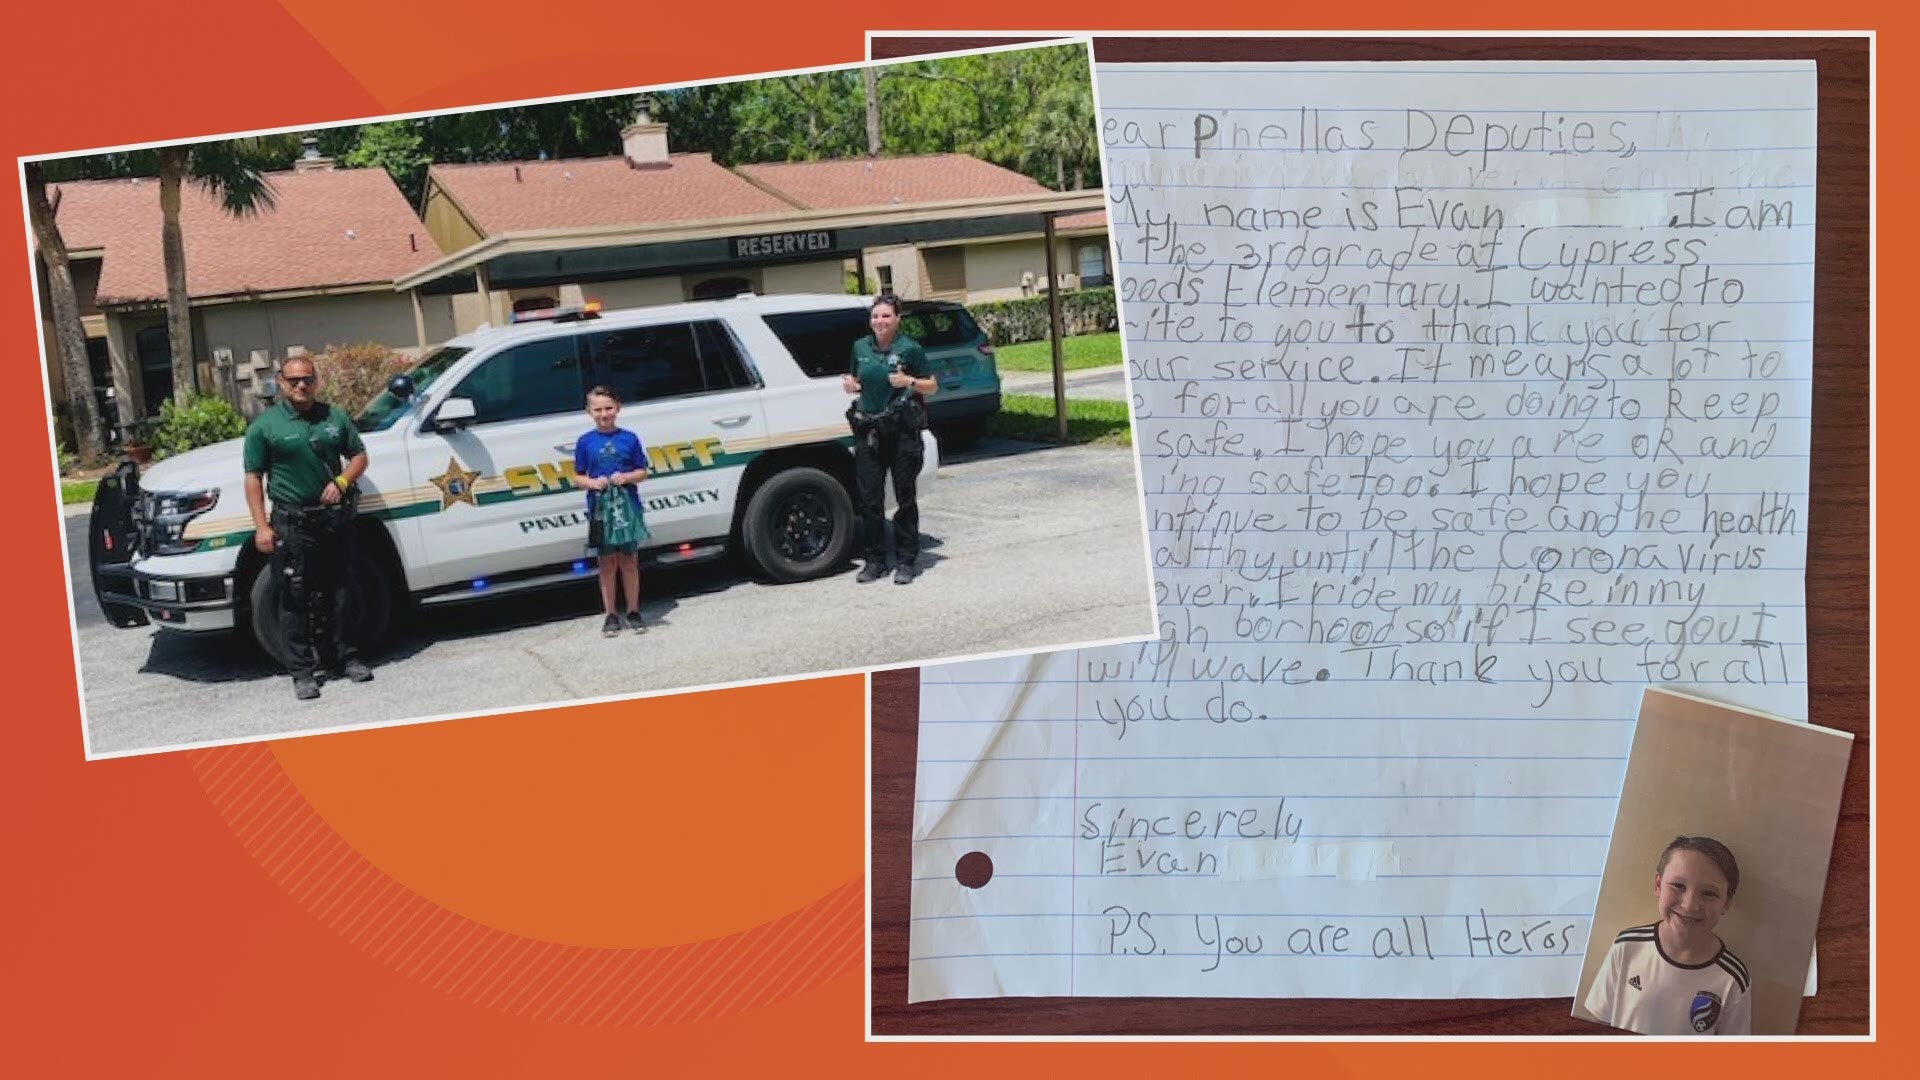 In return, deputies surprised him with a PCSO patch and swag bag.